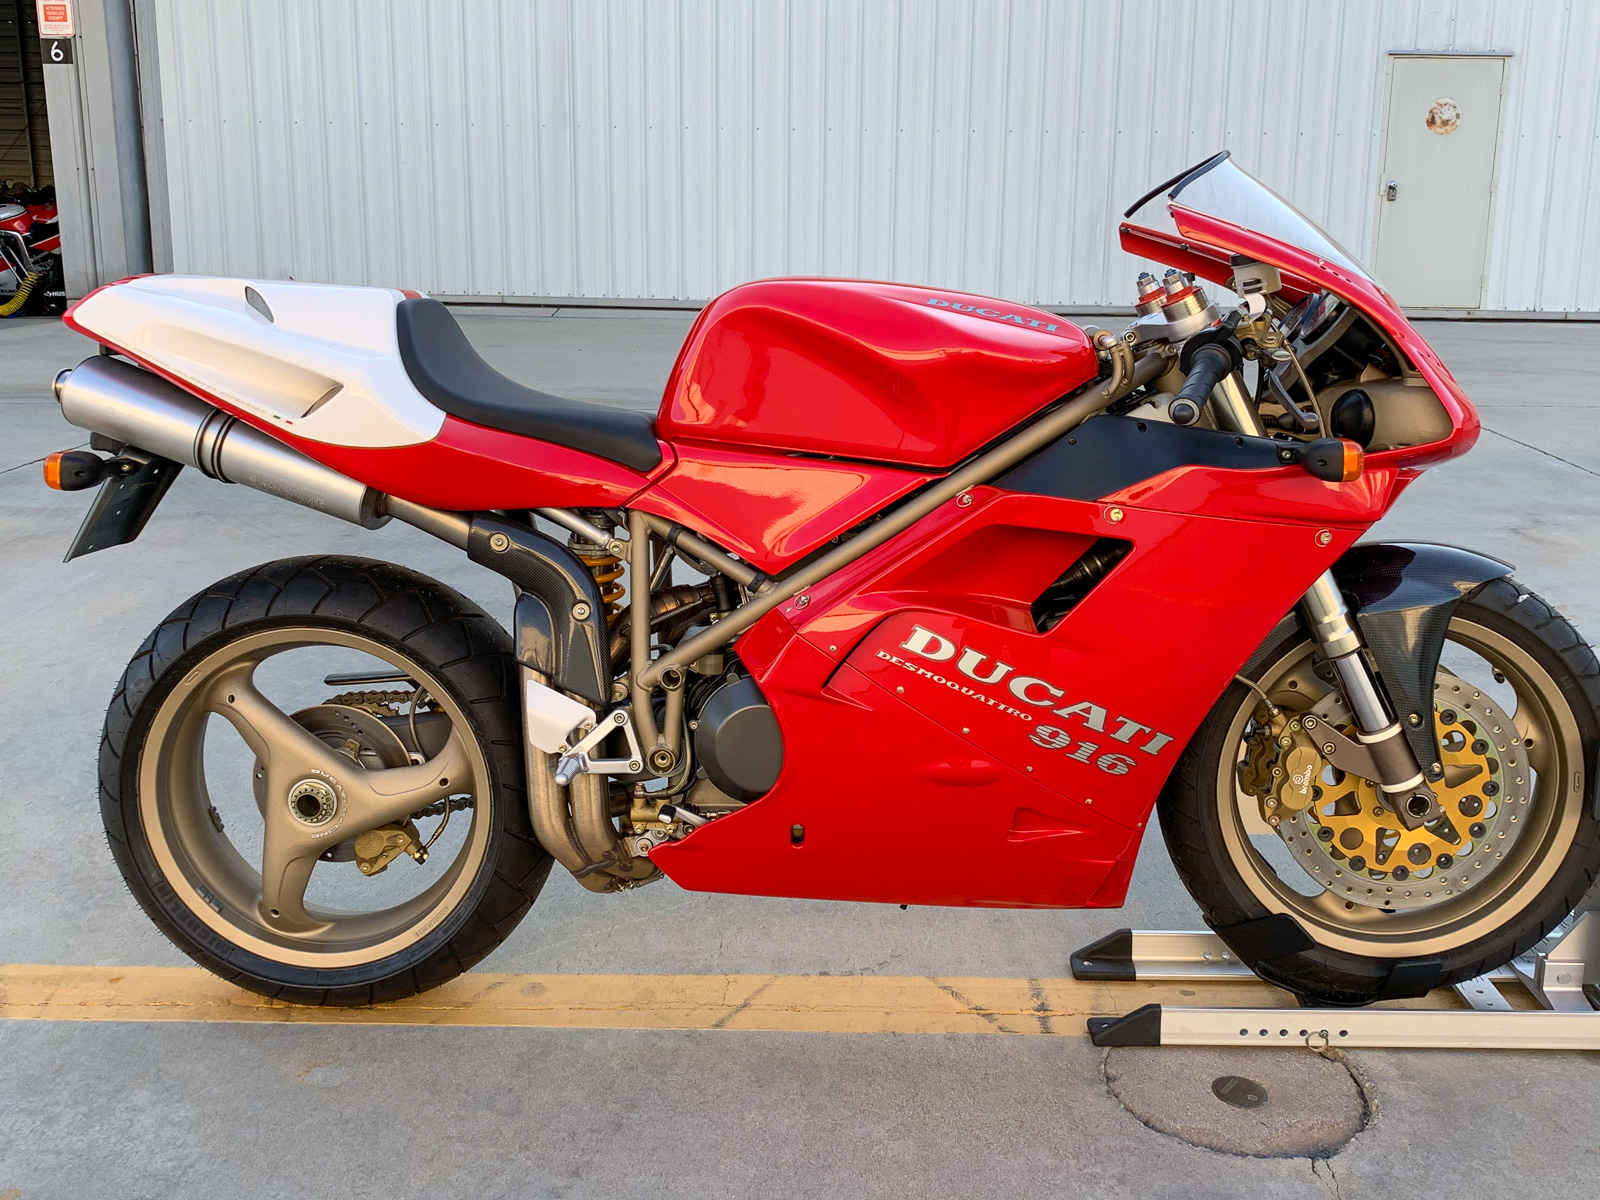 Ducati 916 SPS with 119 Miles